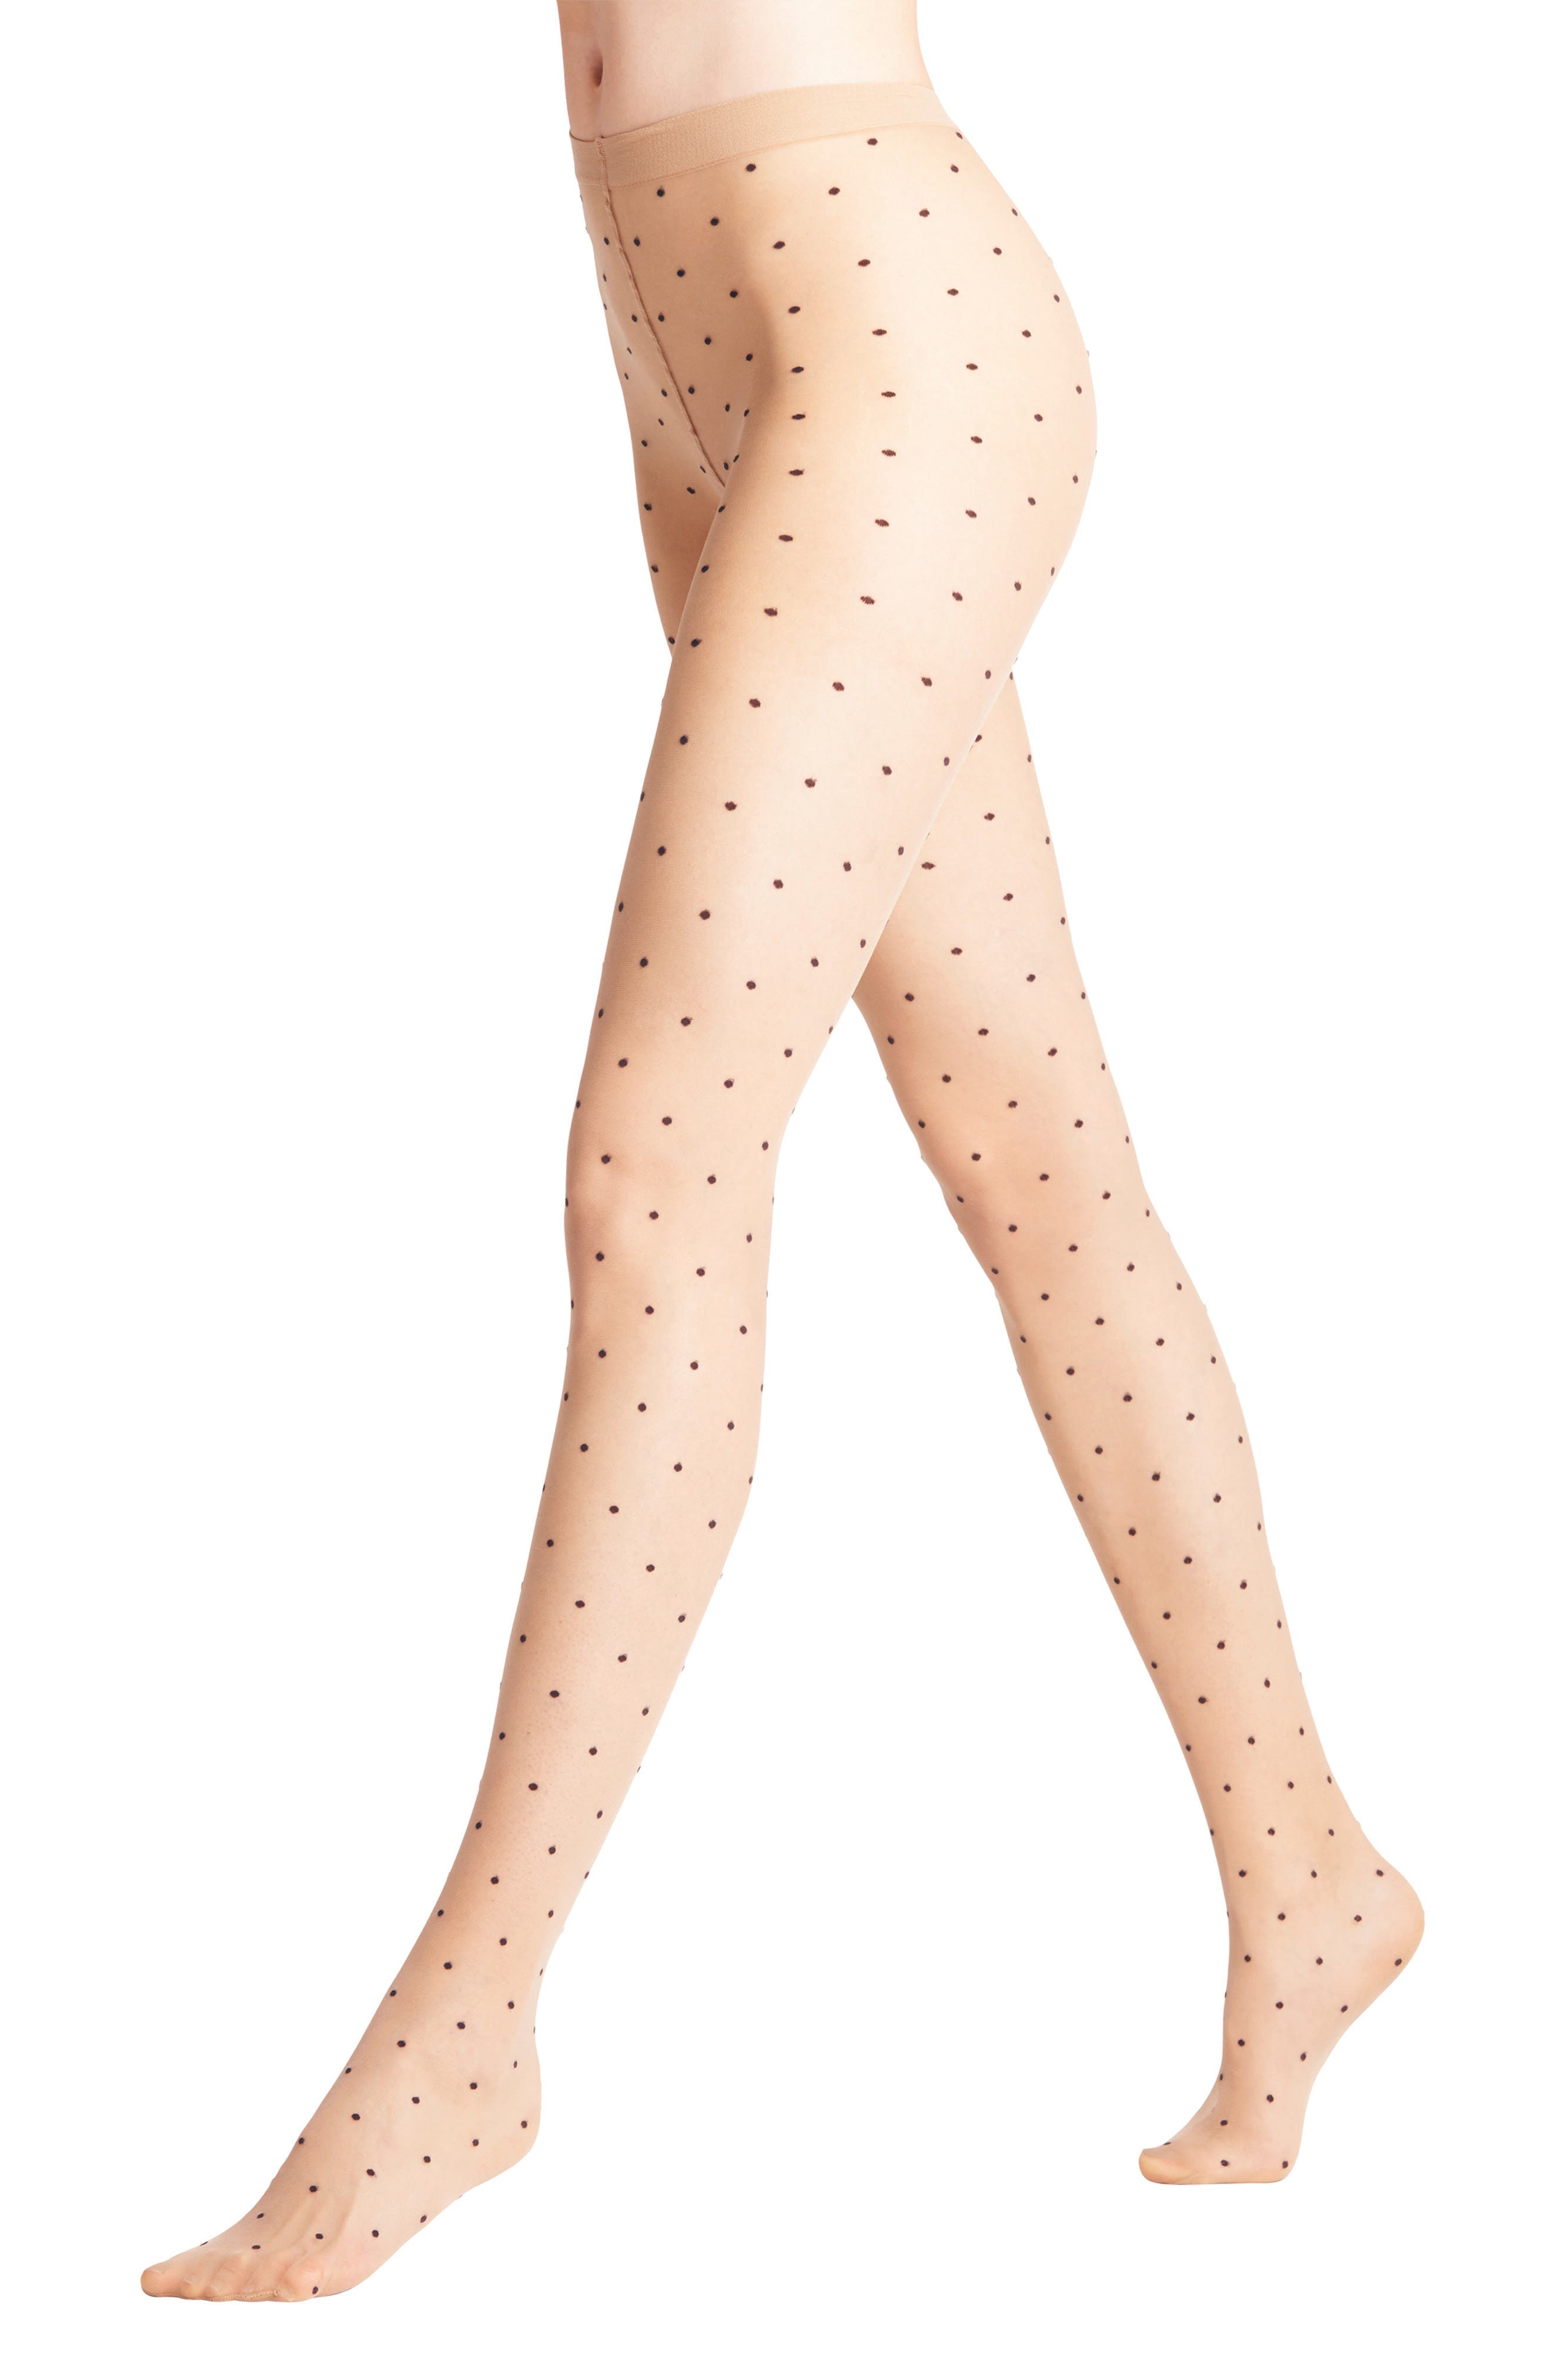 PLUS SIZE LX 1X NUDE SHEER WOVEN BLACK POLKA HEART DOTS TIGHTS BY NORDSTROM NIB